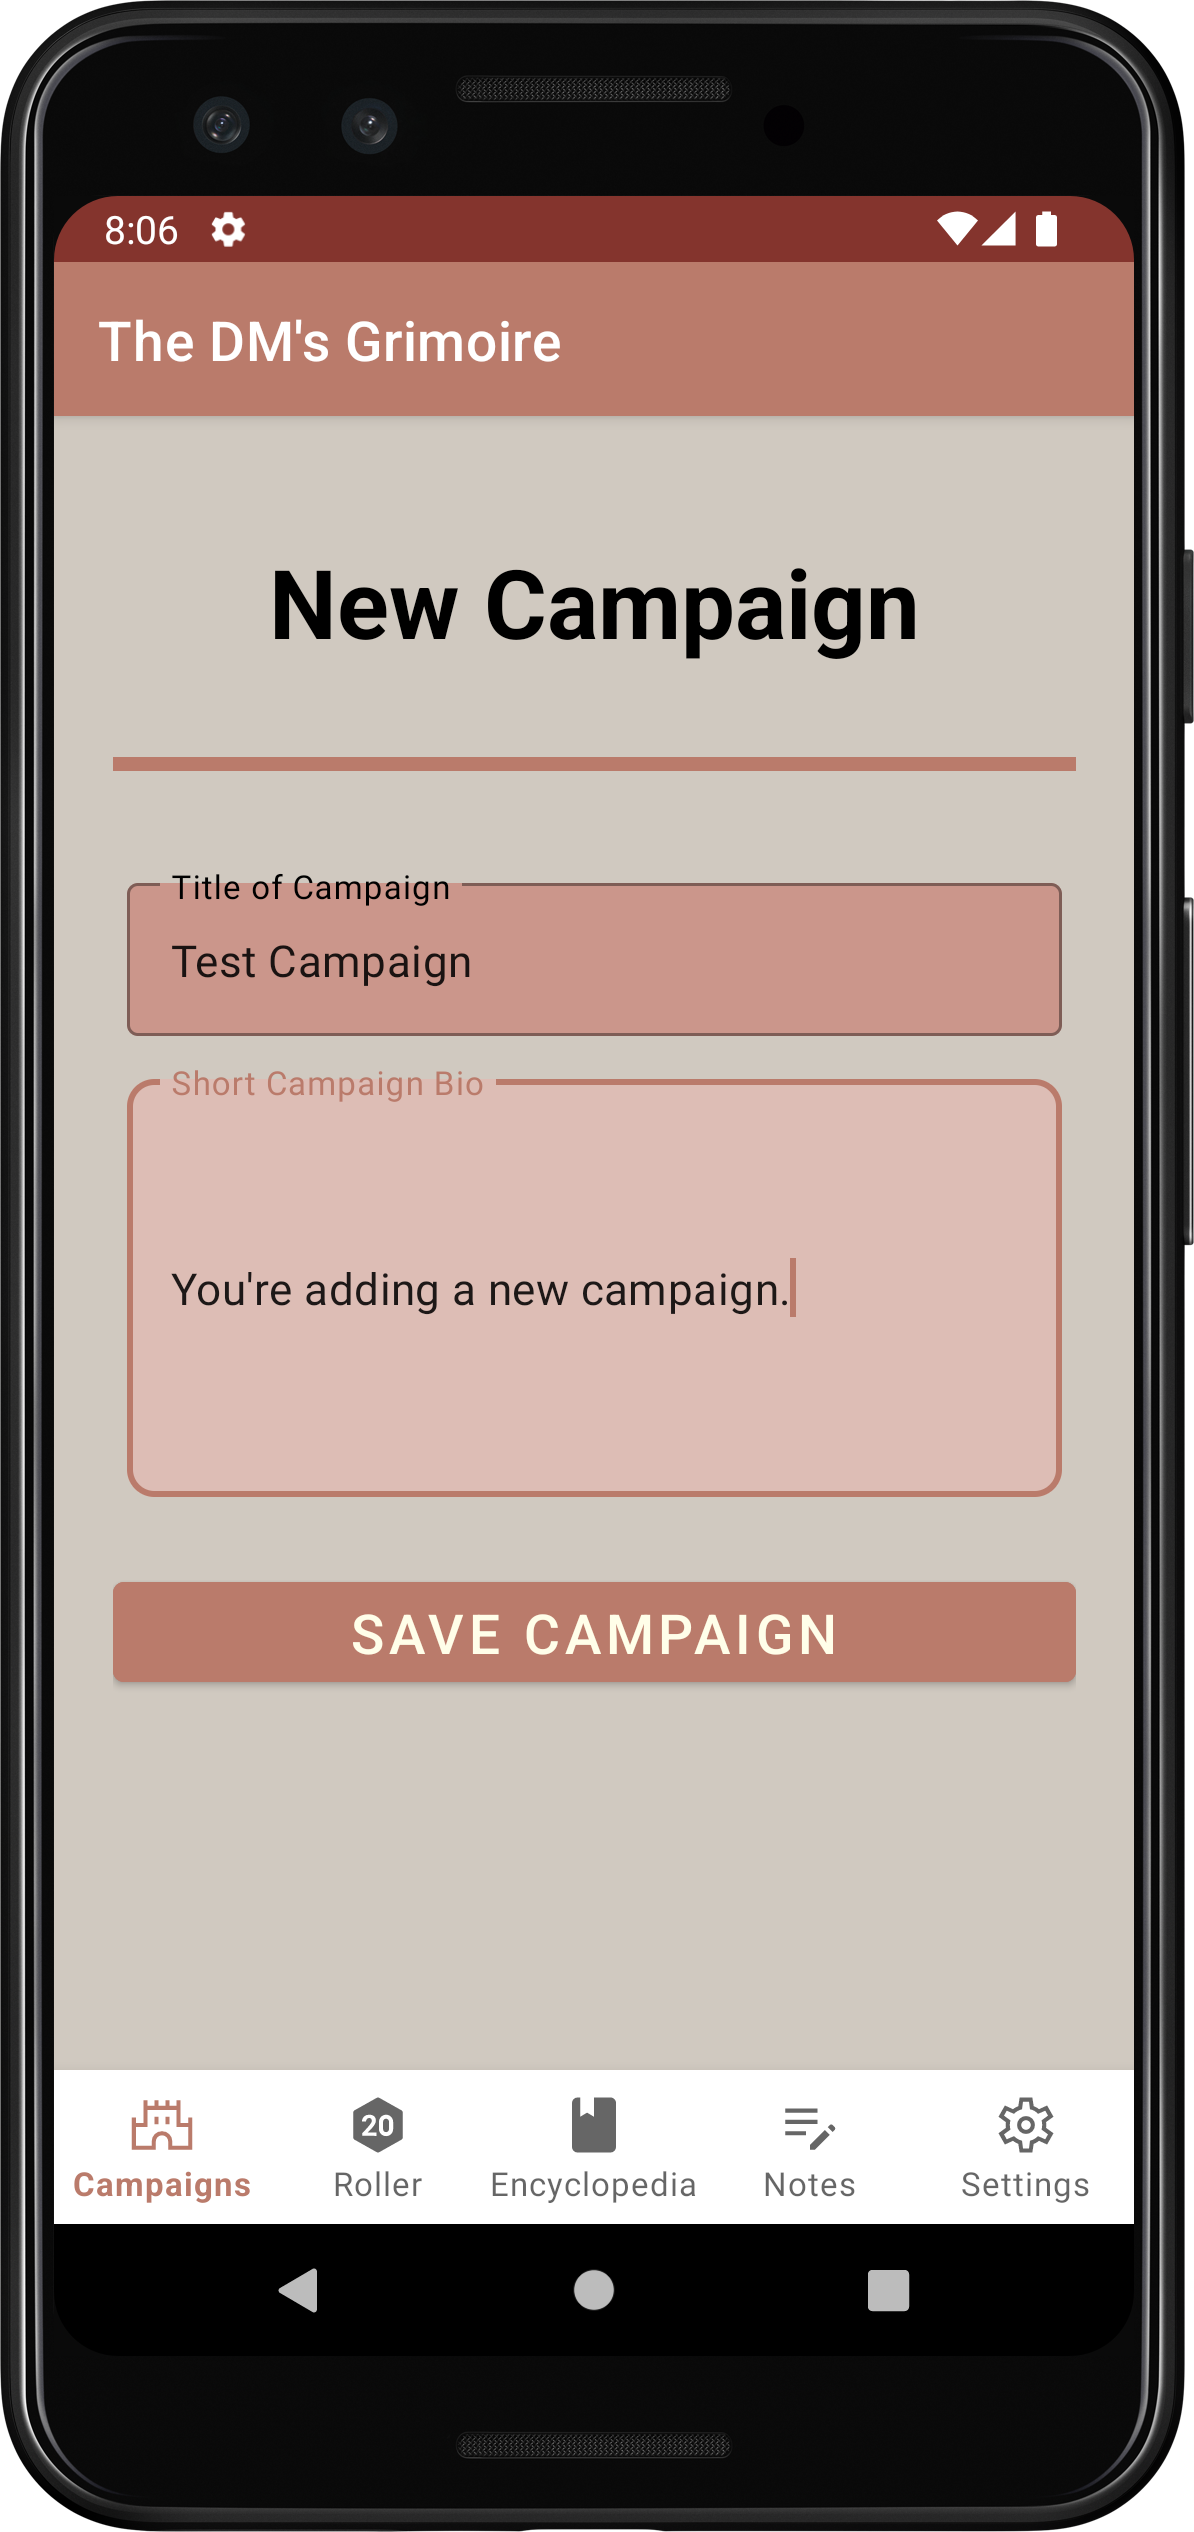 The campaign creation screen. Here, the user enters a title and description for their new campaign.